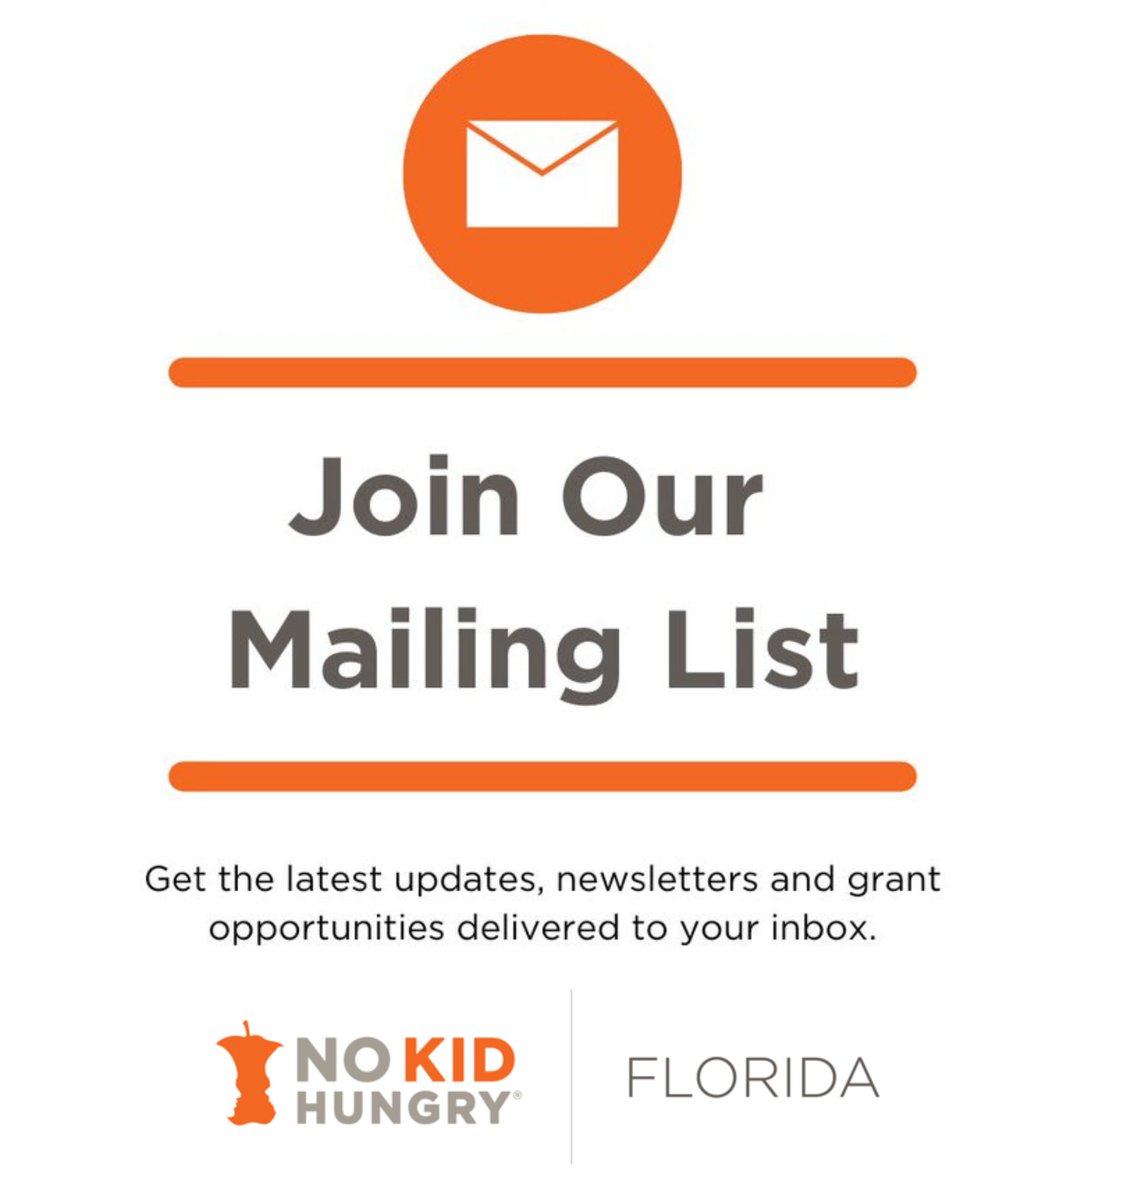 Subscribe to our newsletter and make sure that you don't miss out on any opportunity or update in our fight to make #NoKidHungry a reality! Subscribe here➡️ bit.ly/3jPAekC